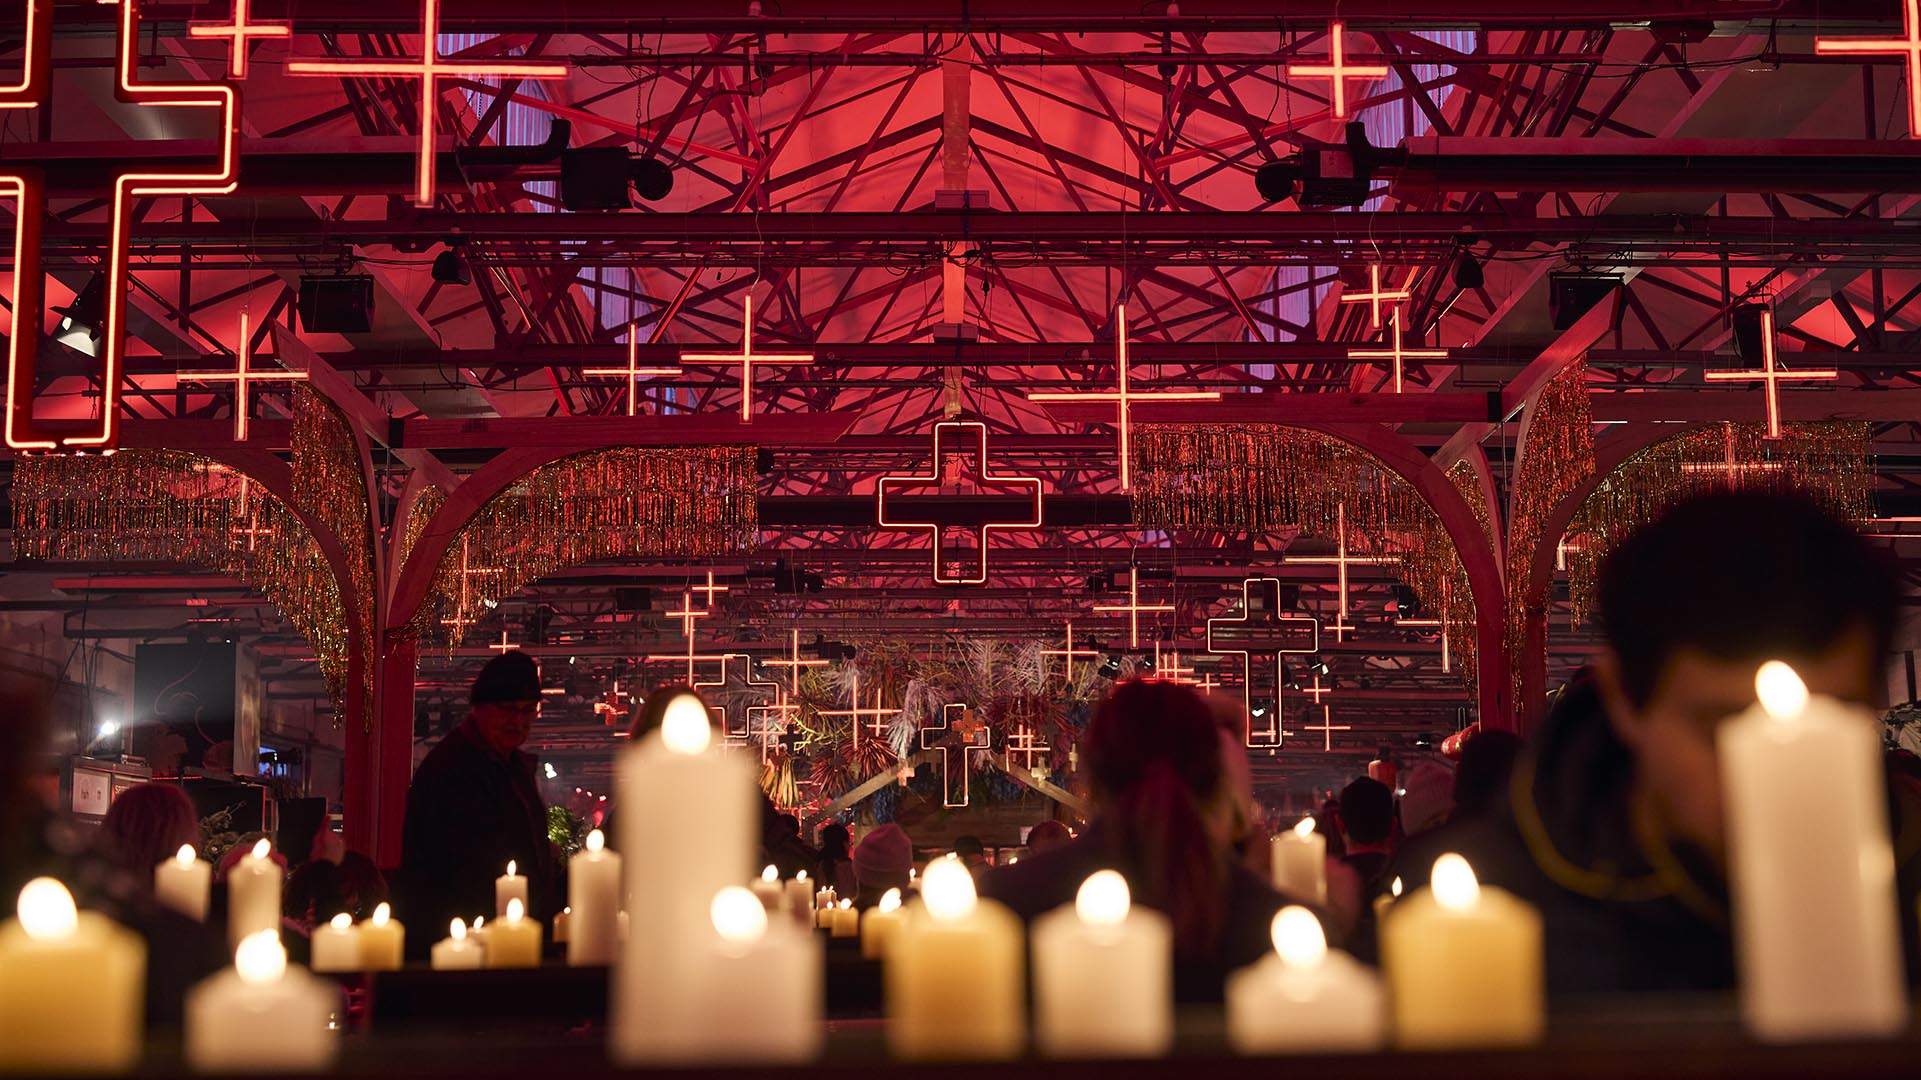 From a 'Twin Peaks'-Inspired Ball to a Giant Teddy with Laser Eyes, Dark Mofo's 2023 Lineup Is Ready to Dazzle